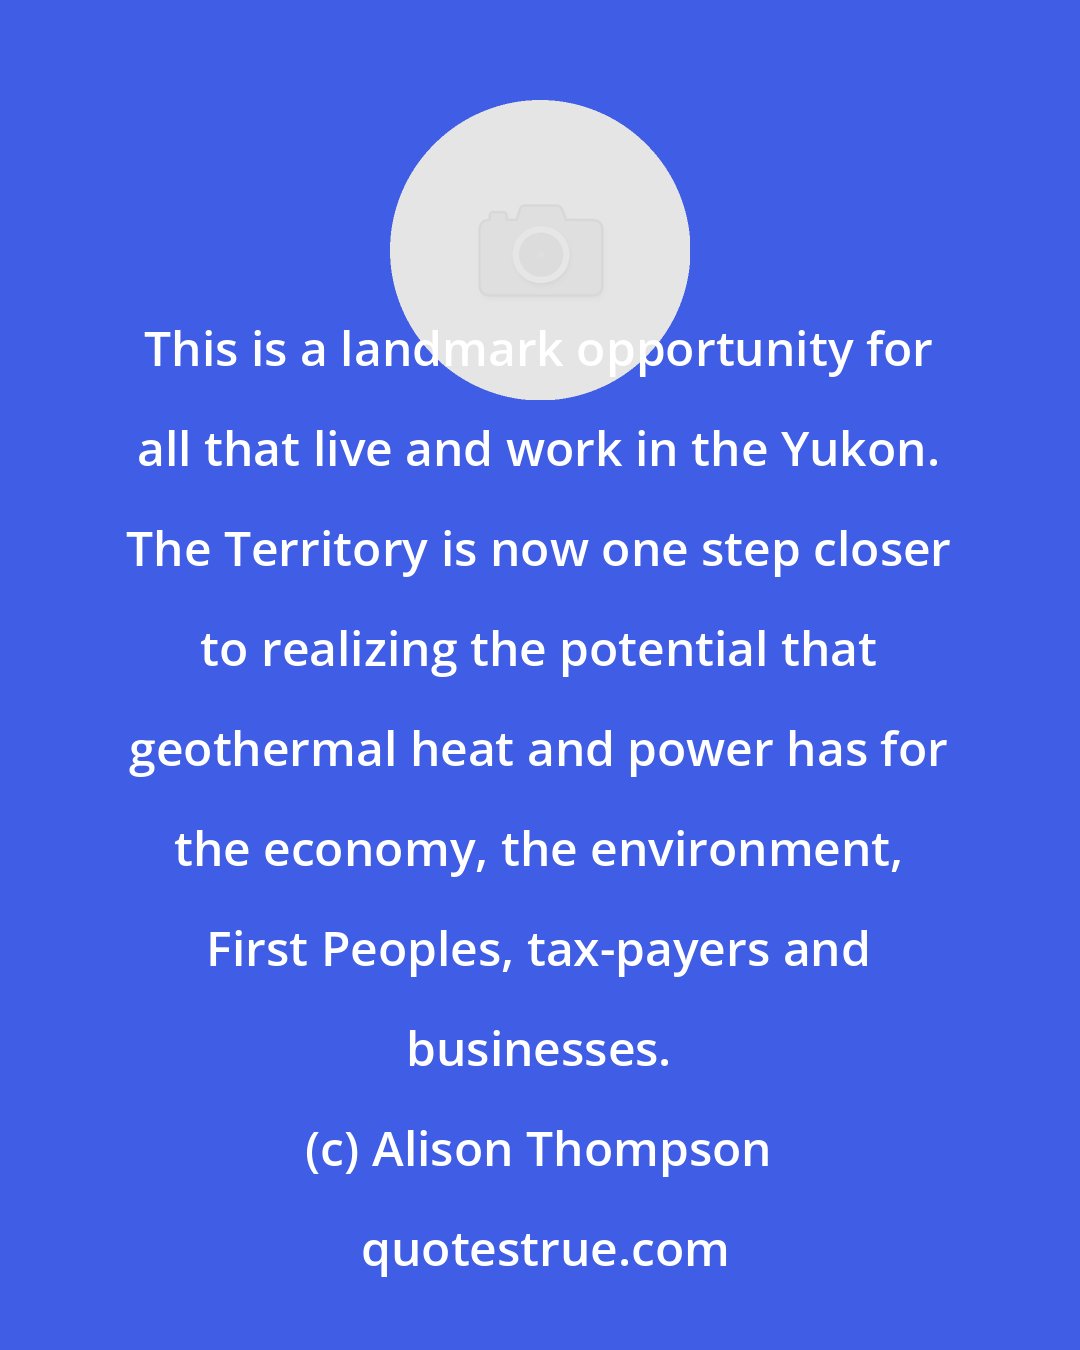 Alison Thompson: This is a landmark opportunity for all that live and work in the Yukon. The Territory is now one step closer to realizing the potential that geothermal heat and power has for the economy, the environment, First Peoples, tax-payers and businesses.